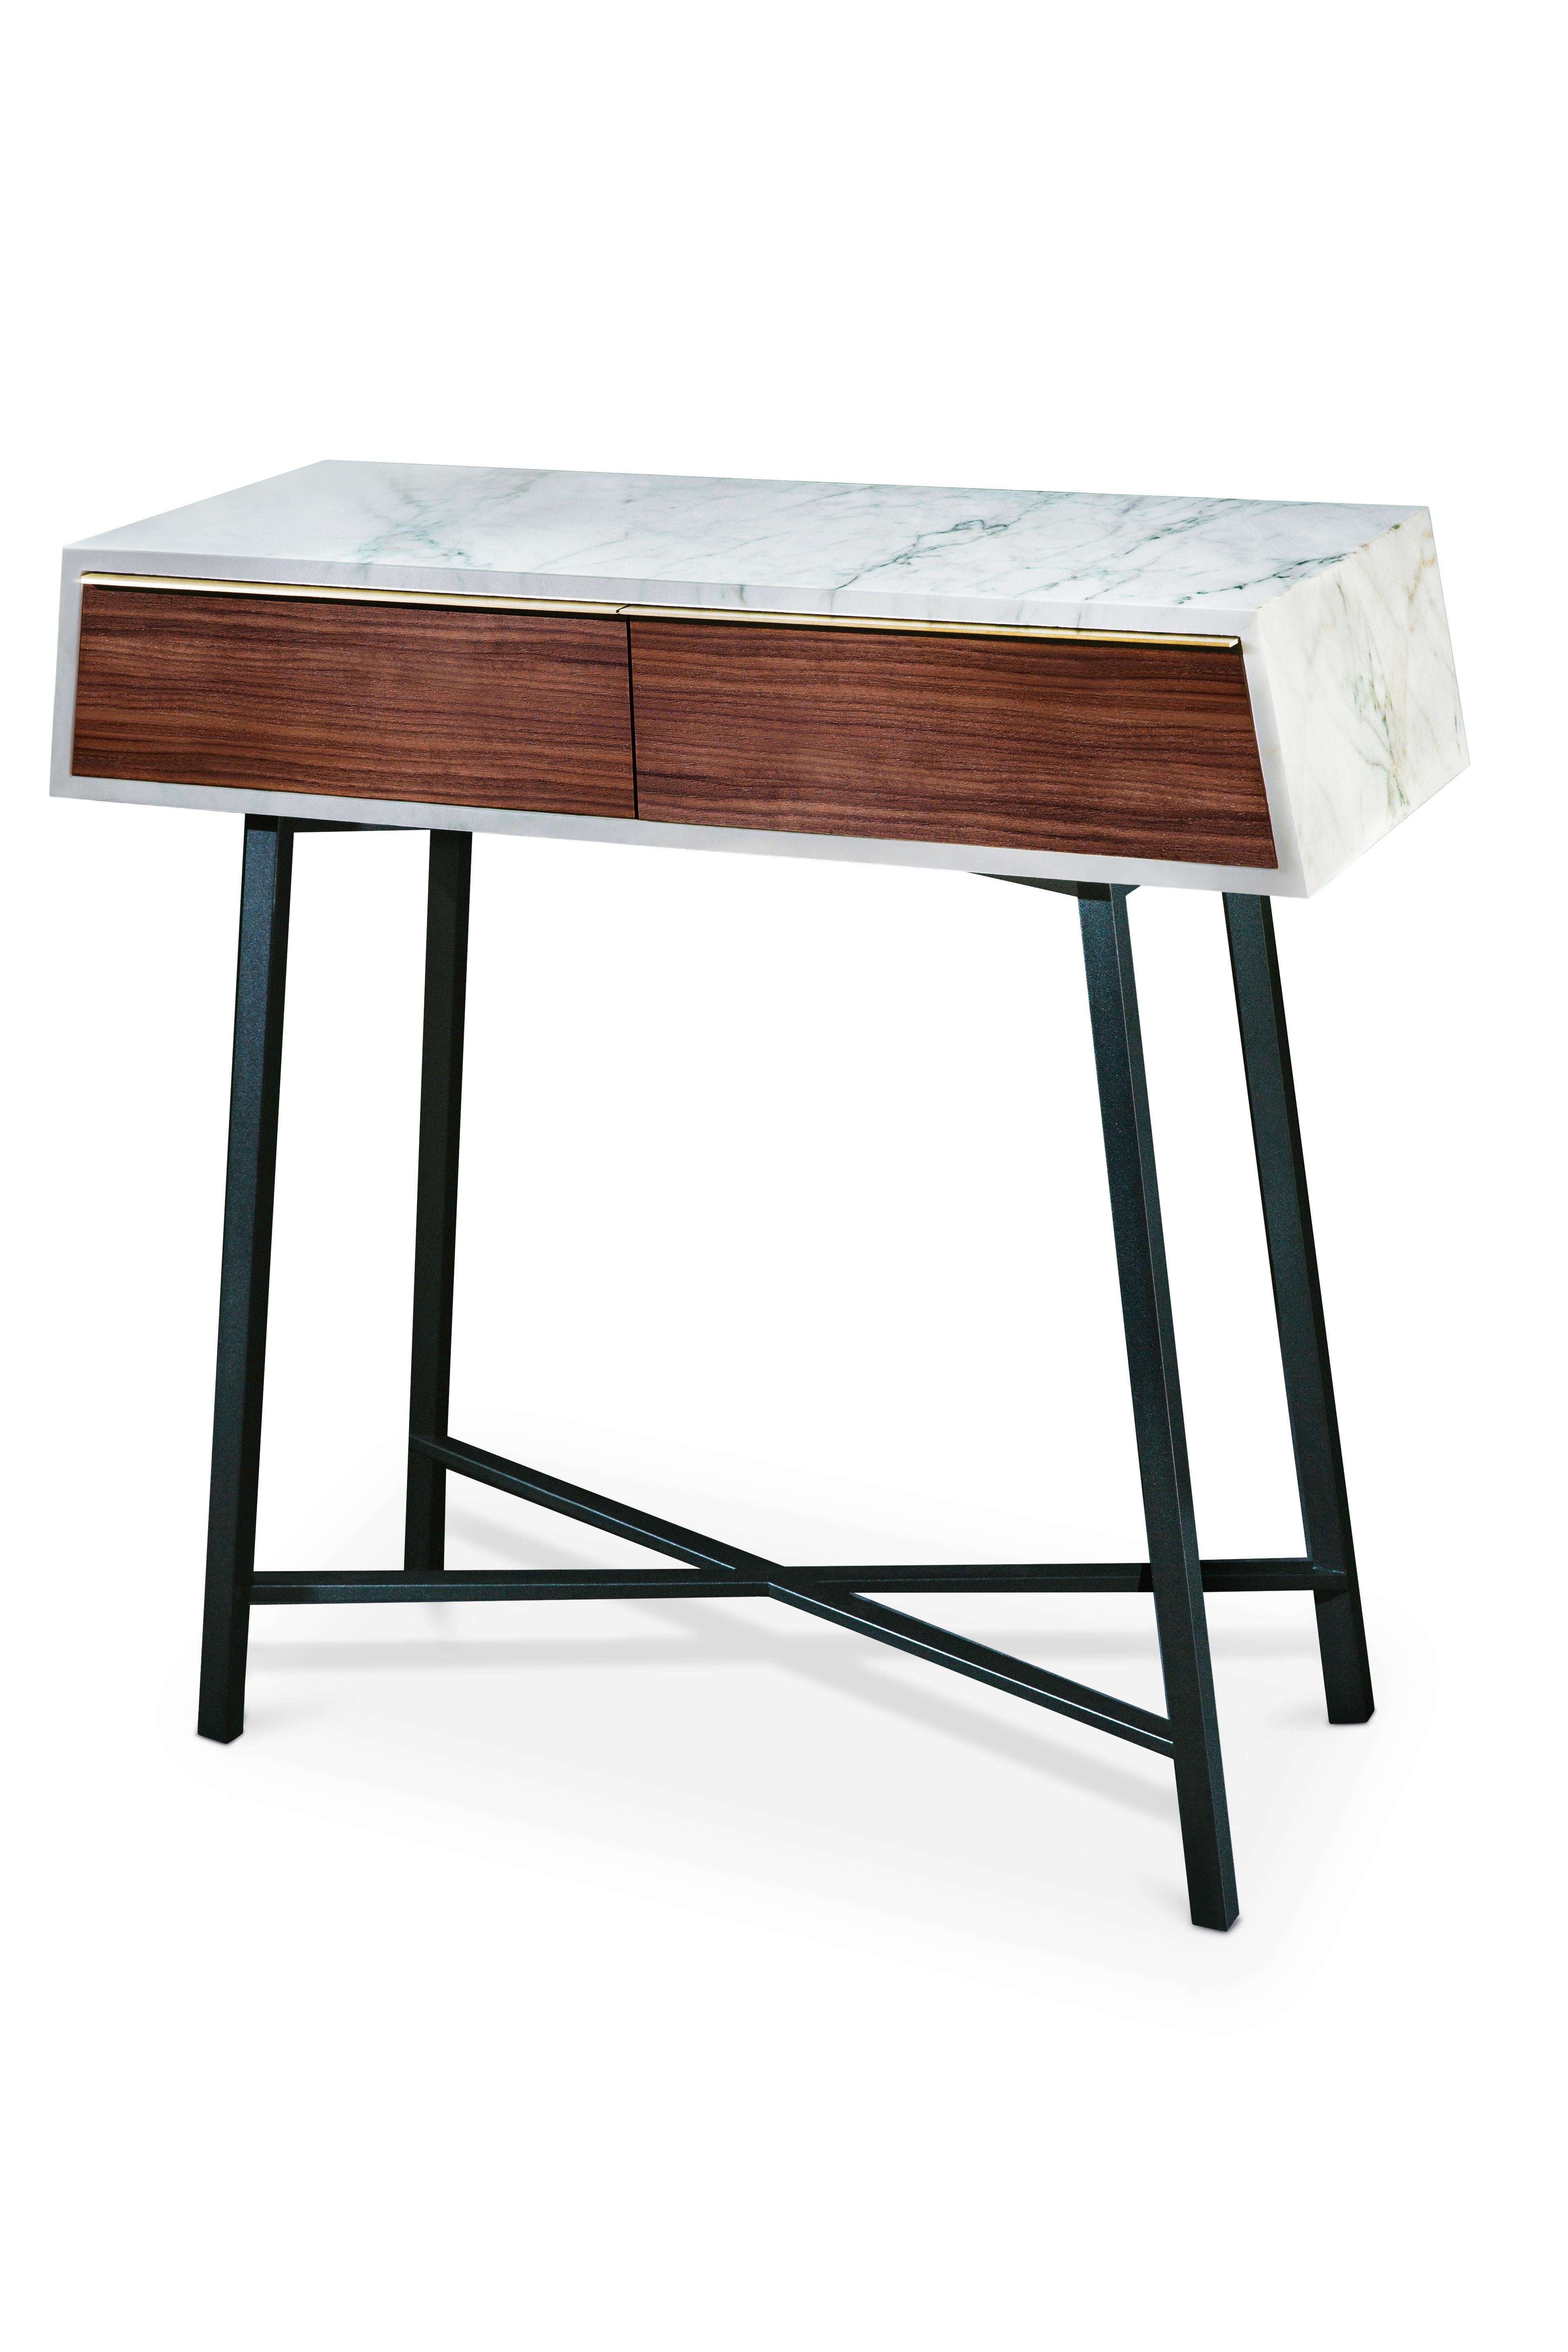 NORDST JESSICA Console 2 Drawers Table, Black Eagle Marble, Danish Modern Design For Sale 1